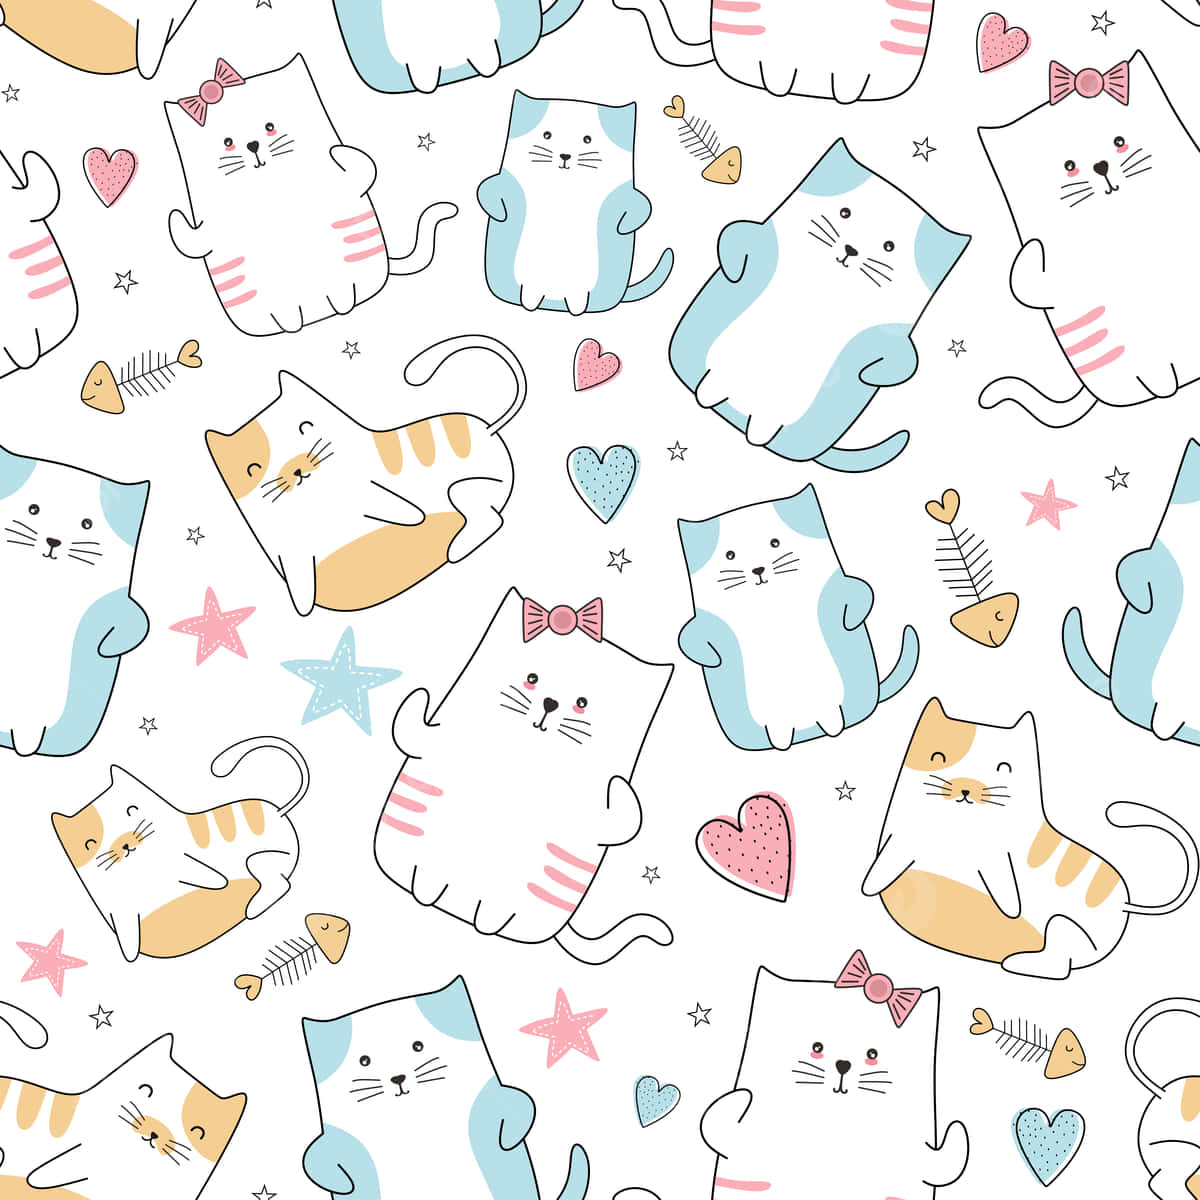 A Cute Cat Pattern Makes Any Wall or Fabirc Look Fun and Sweet! Wallpaper